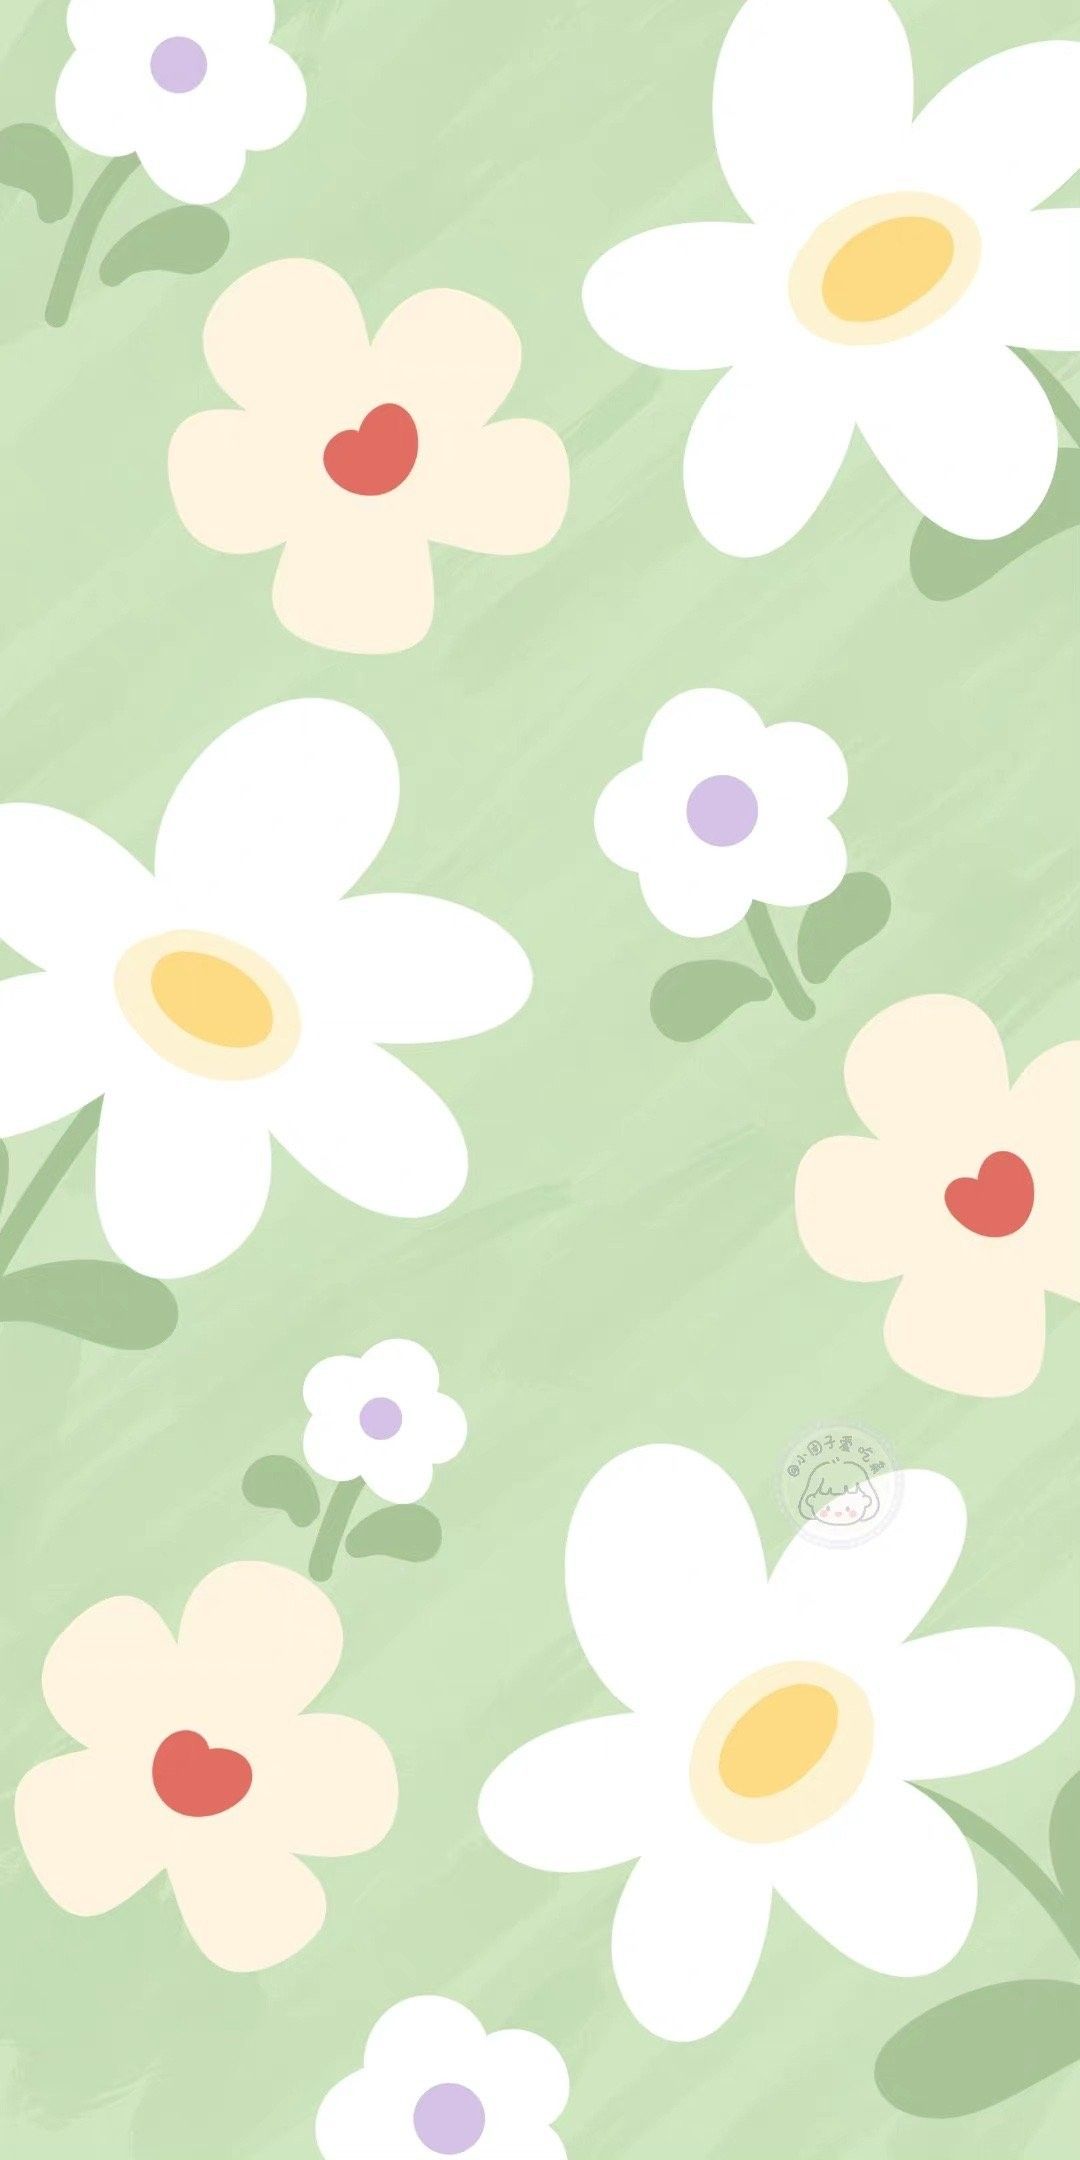 A green and white pattern with flowers - Preppy, summer